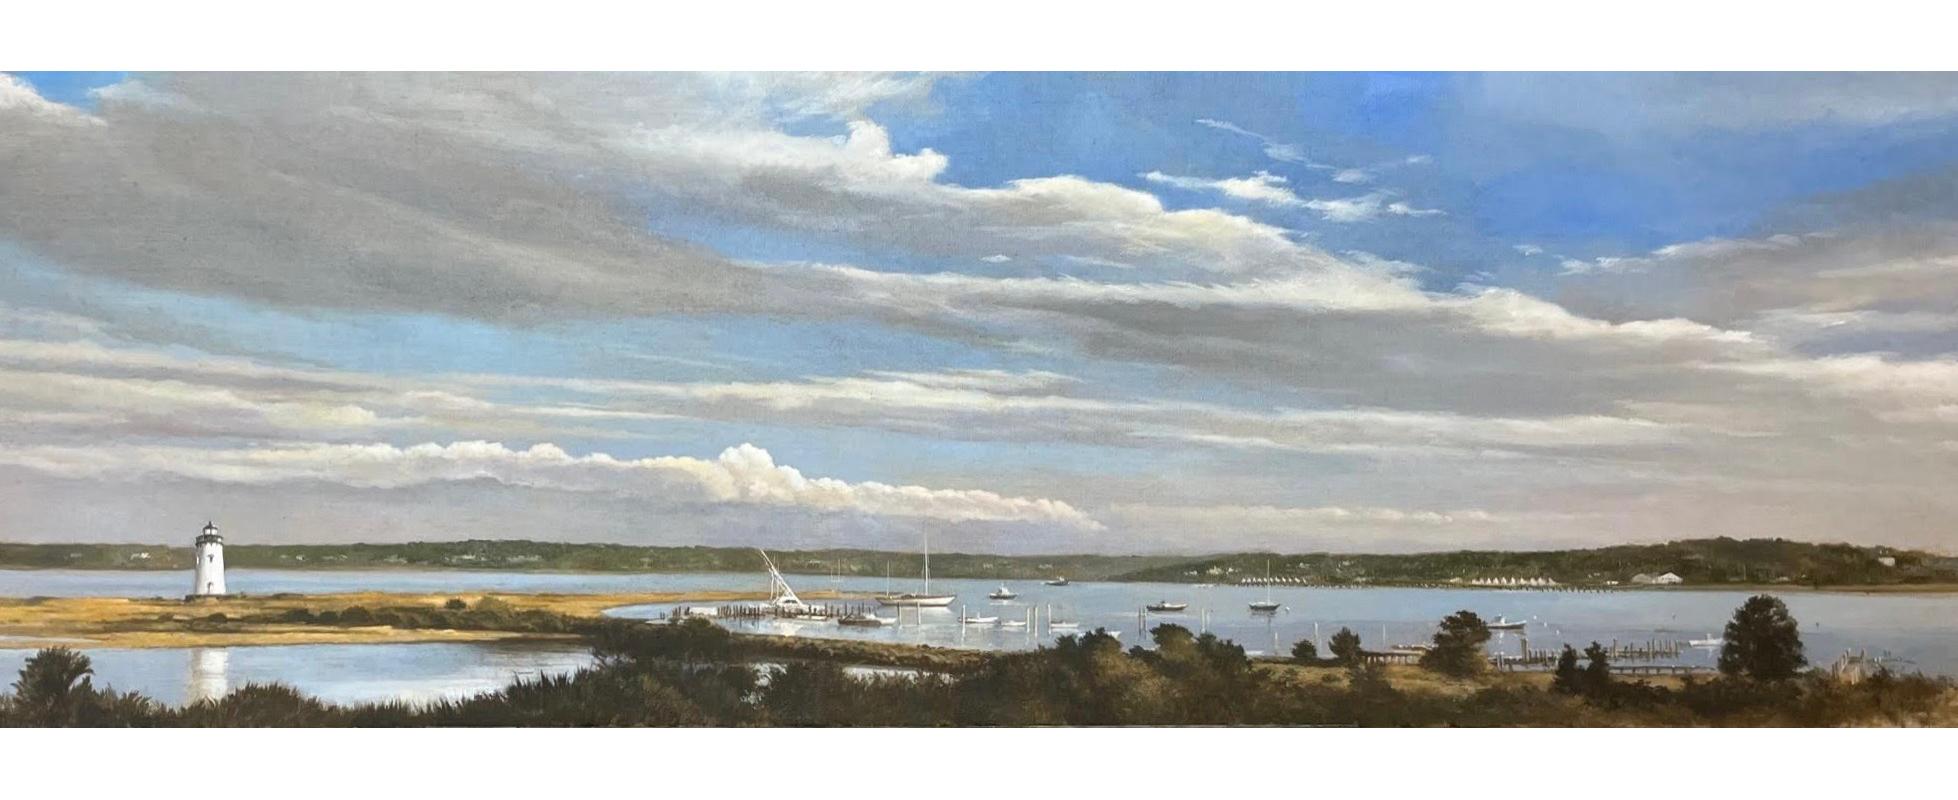 Michel Brosseau Landscape Painting - "Afternoon on the Bay" oil painting of Edgartown Harbor with clouds, lighthouse